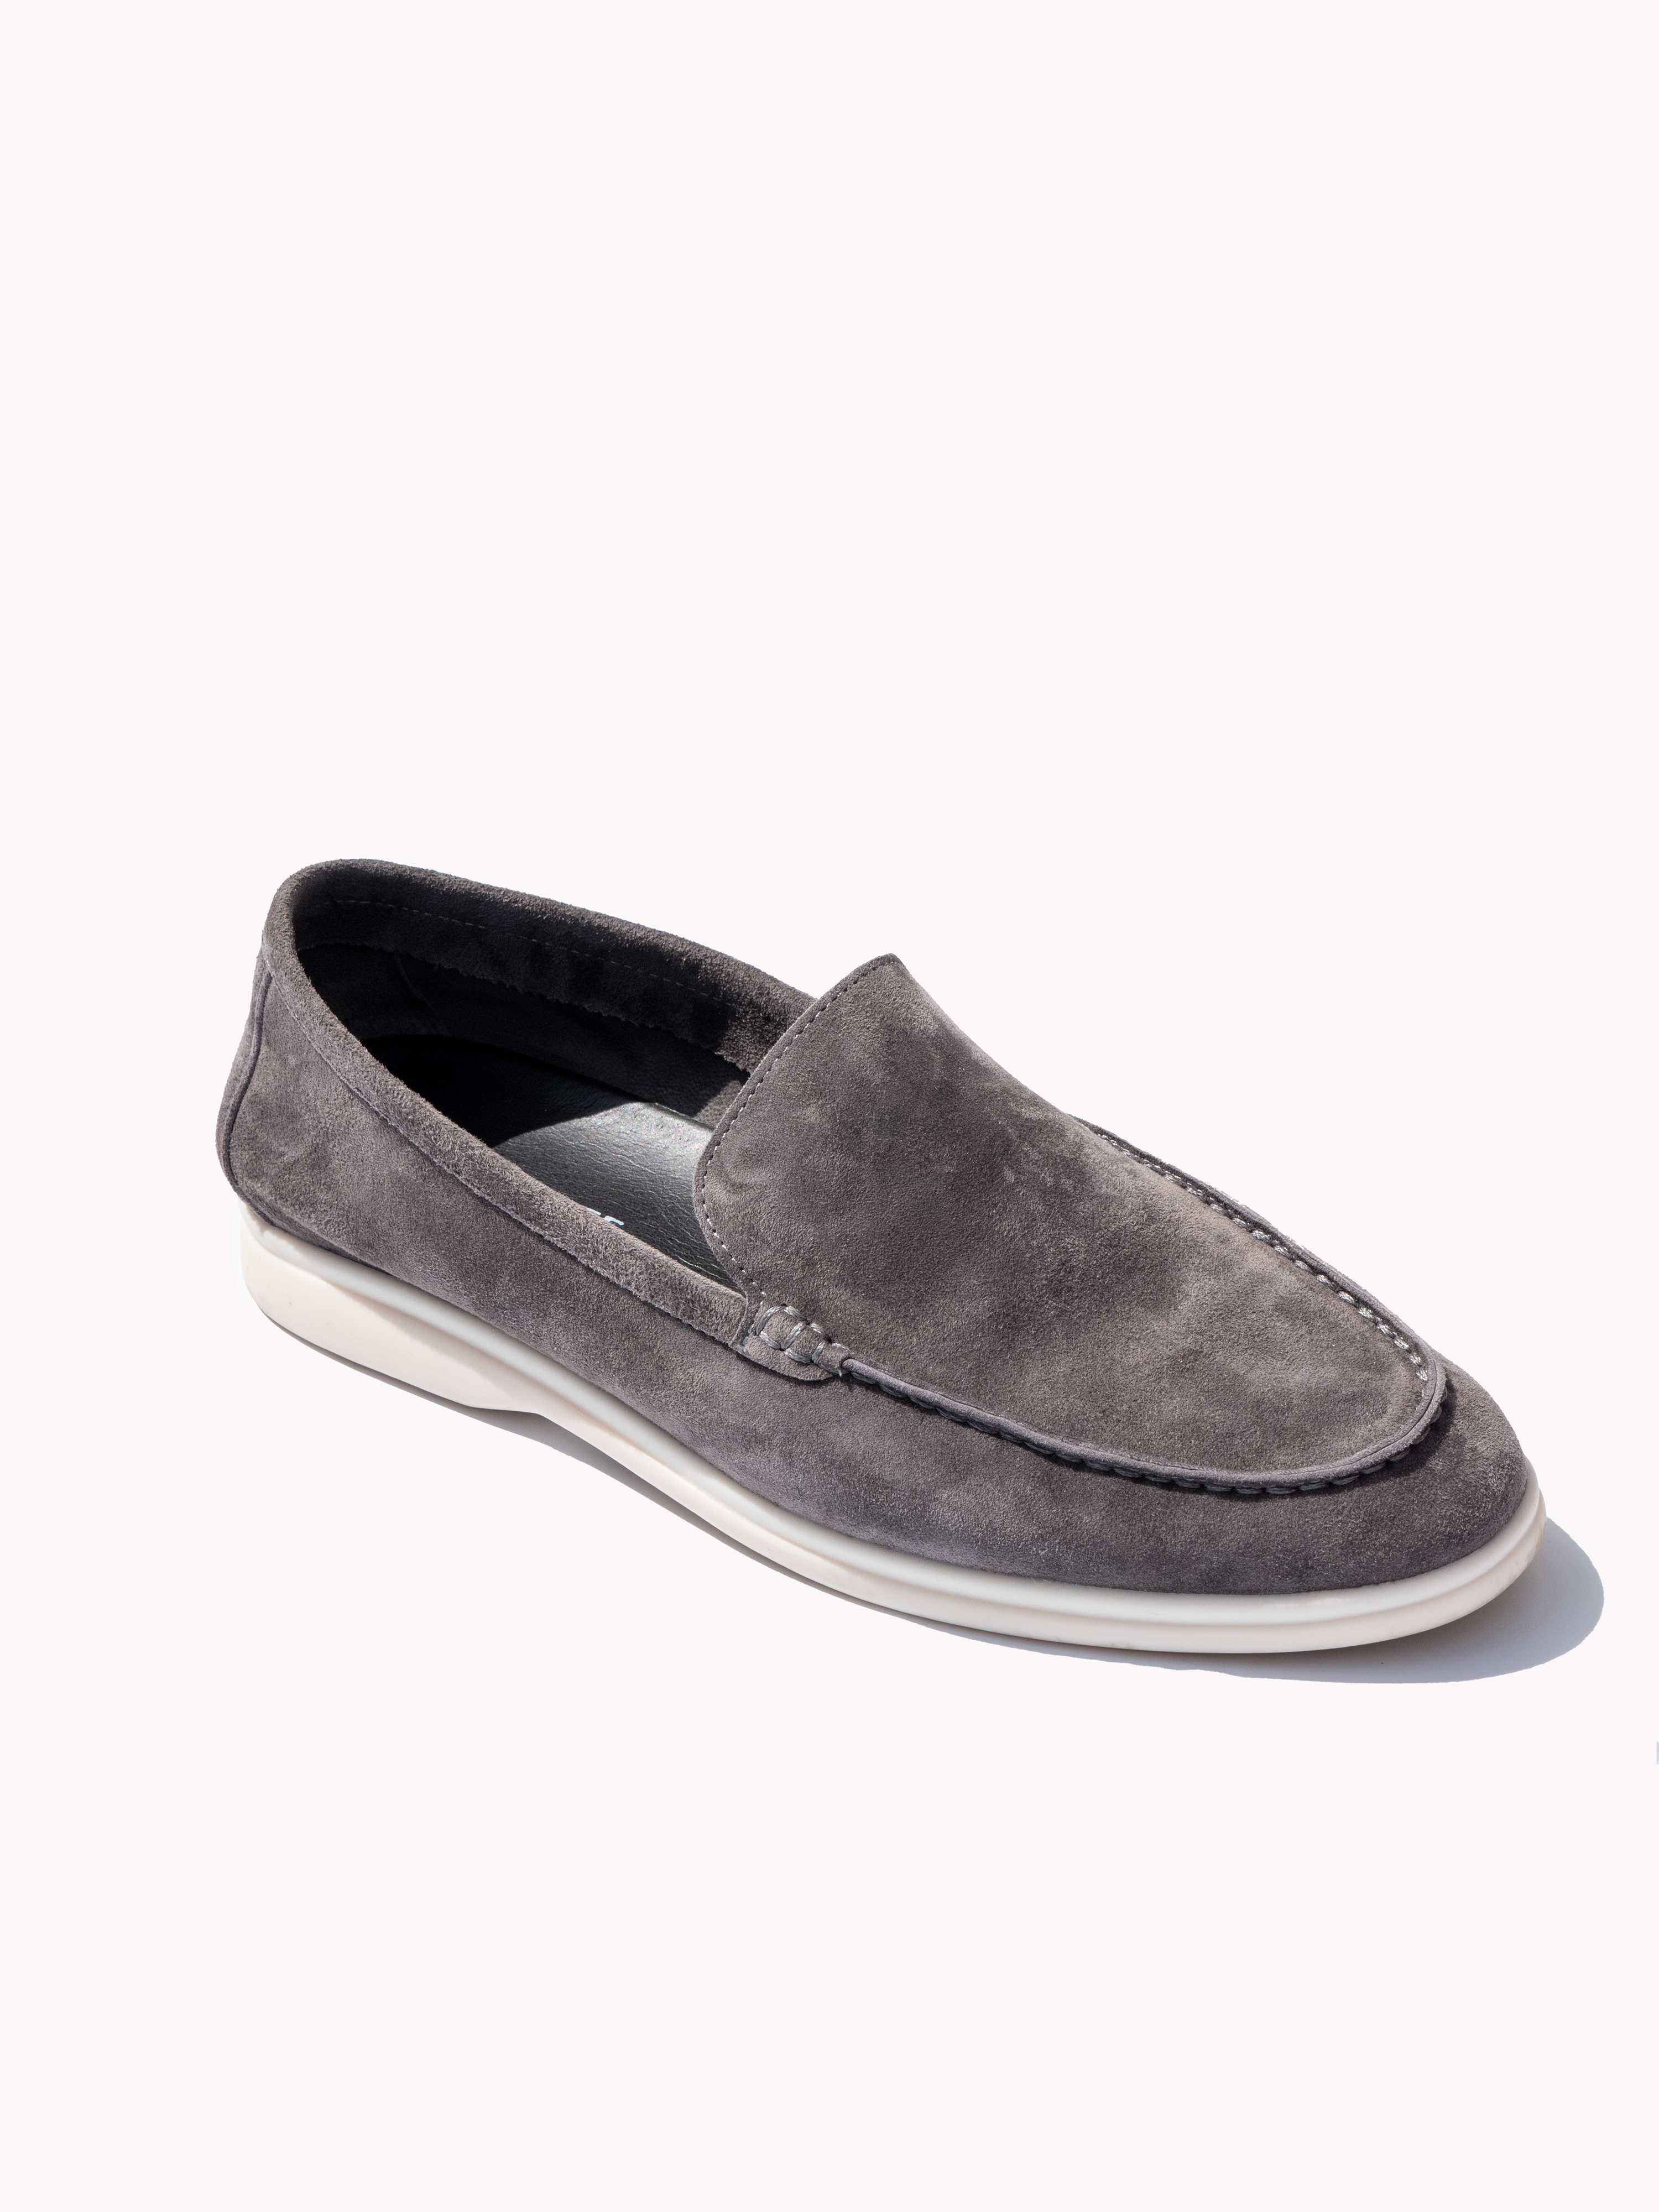 Marina Suede Loafers - Fog Gray